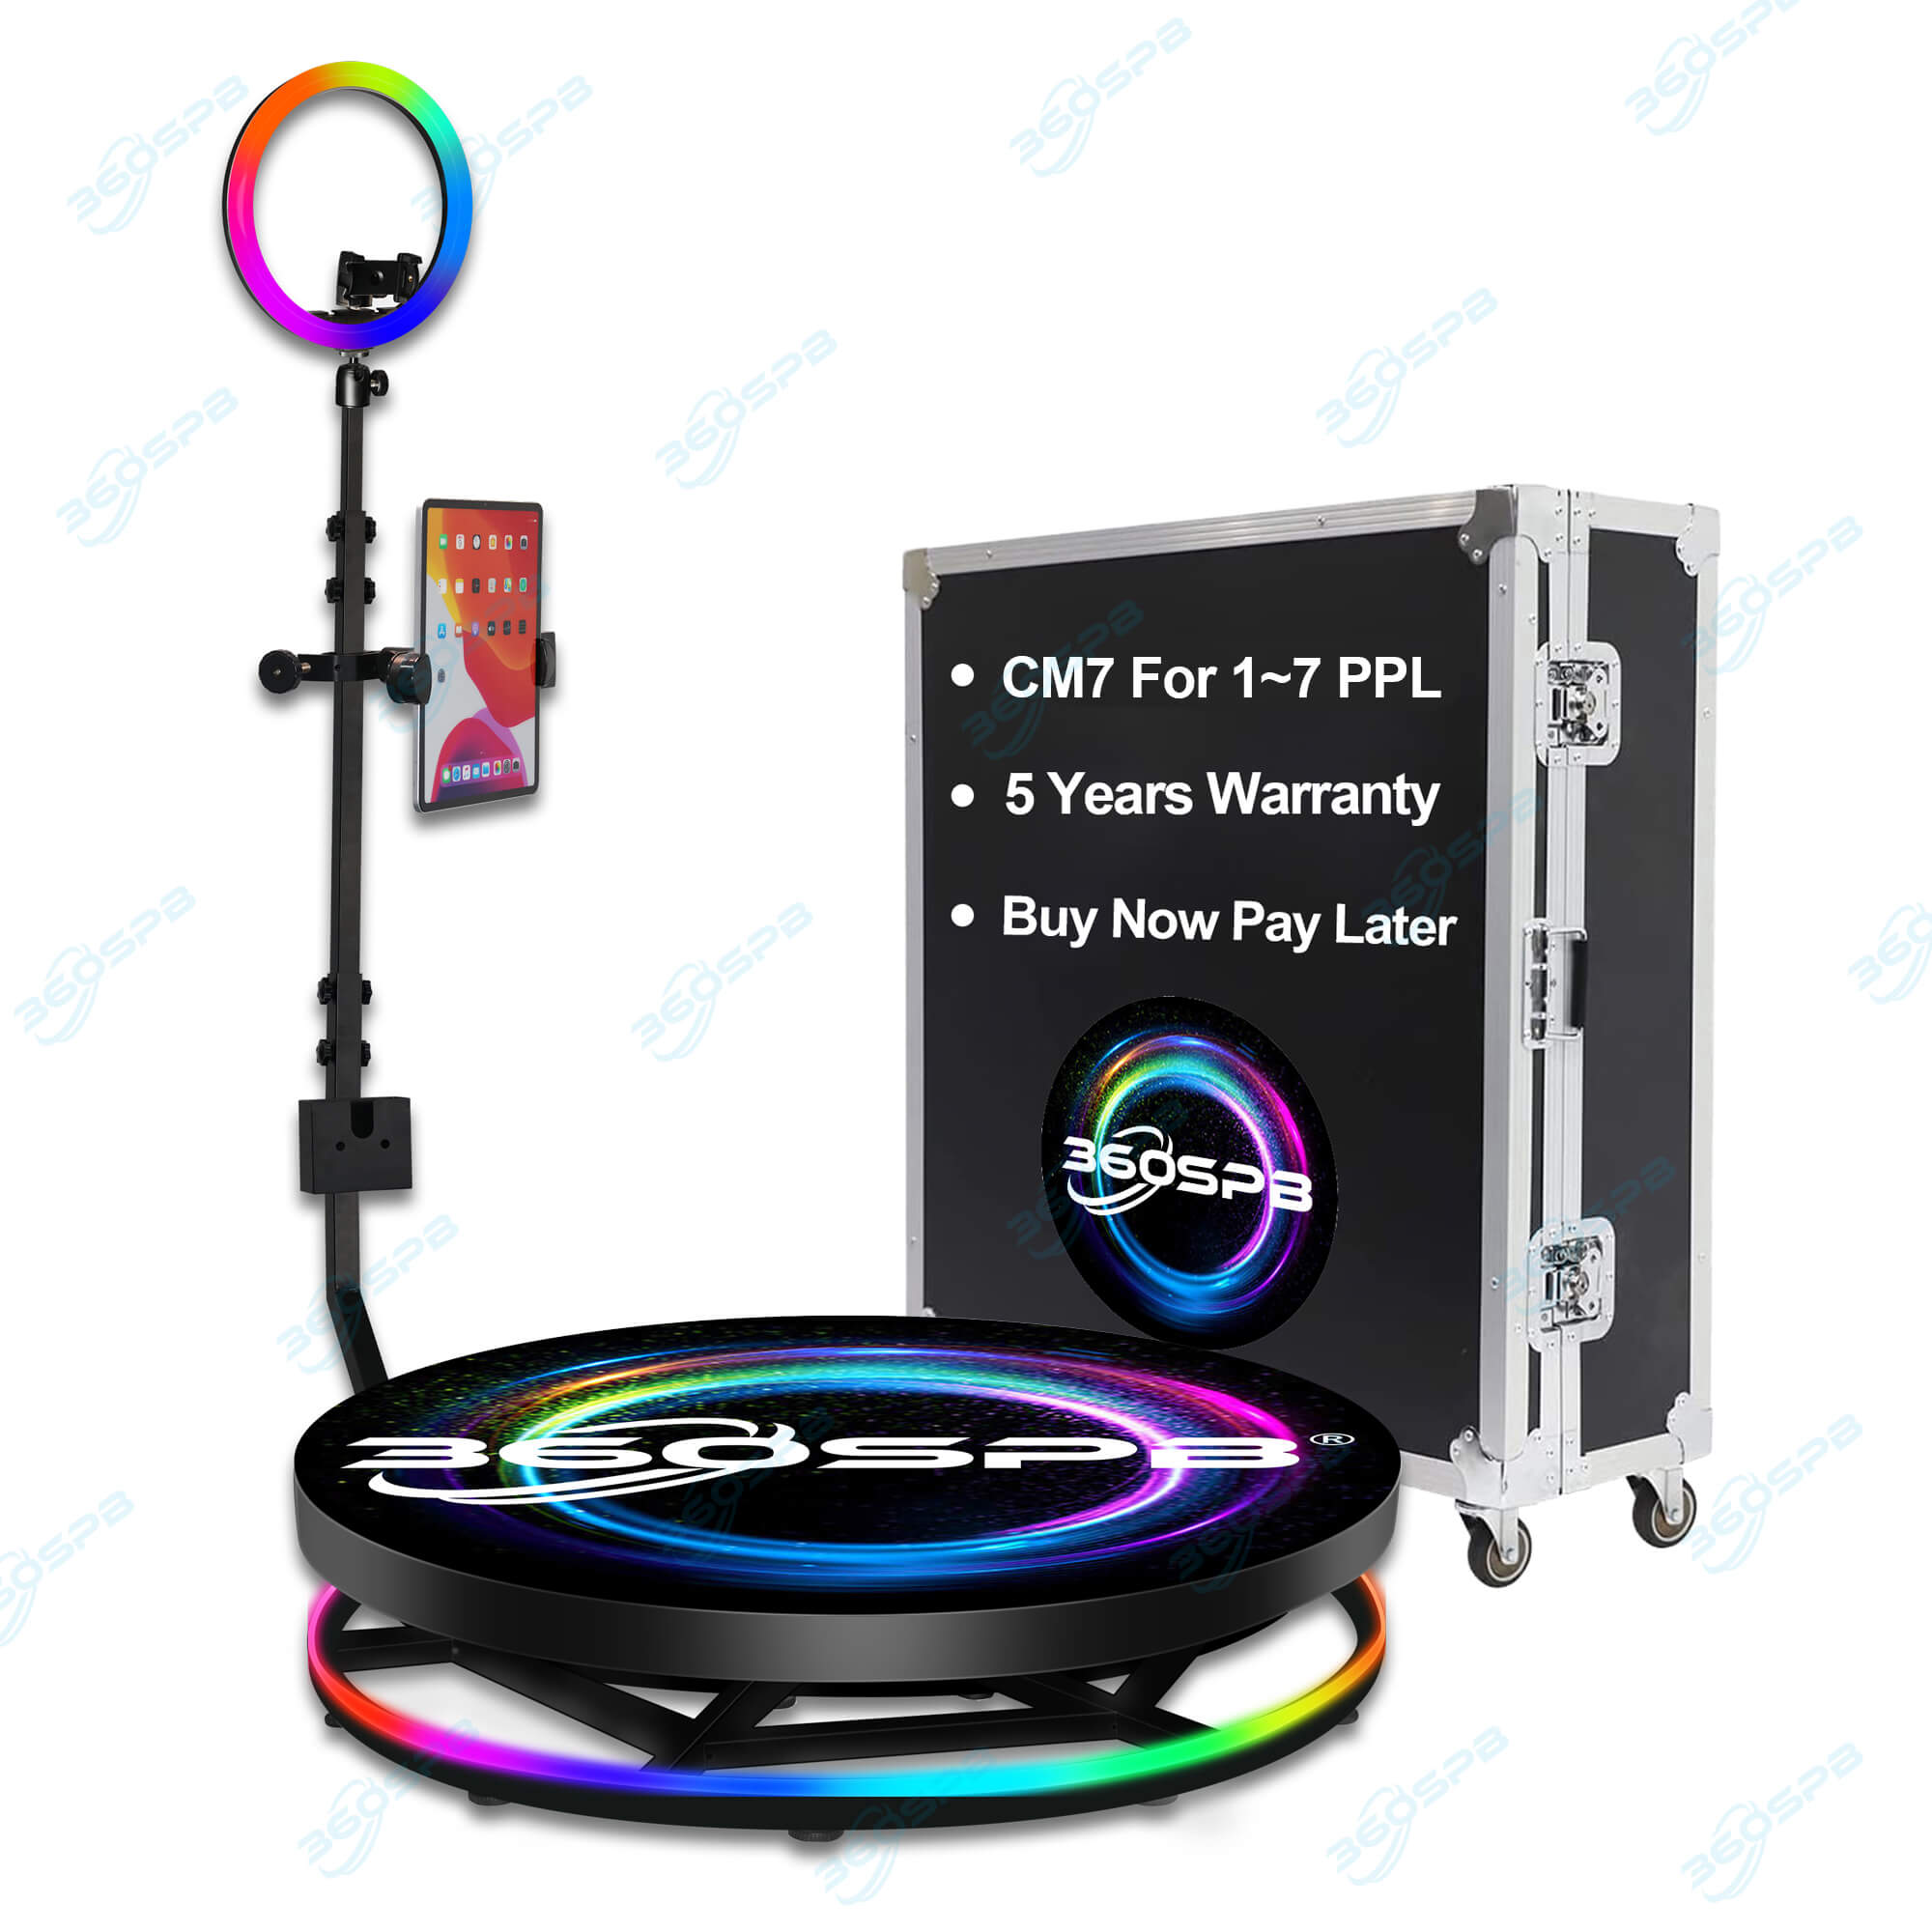 360 Camera Booth - CM7 46 - 360 Photo Booth for sale - 360 booth – 360SPB